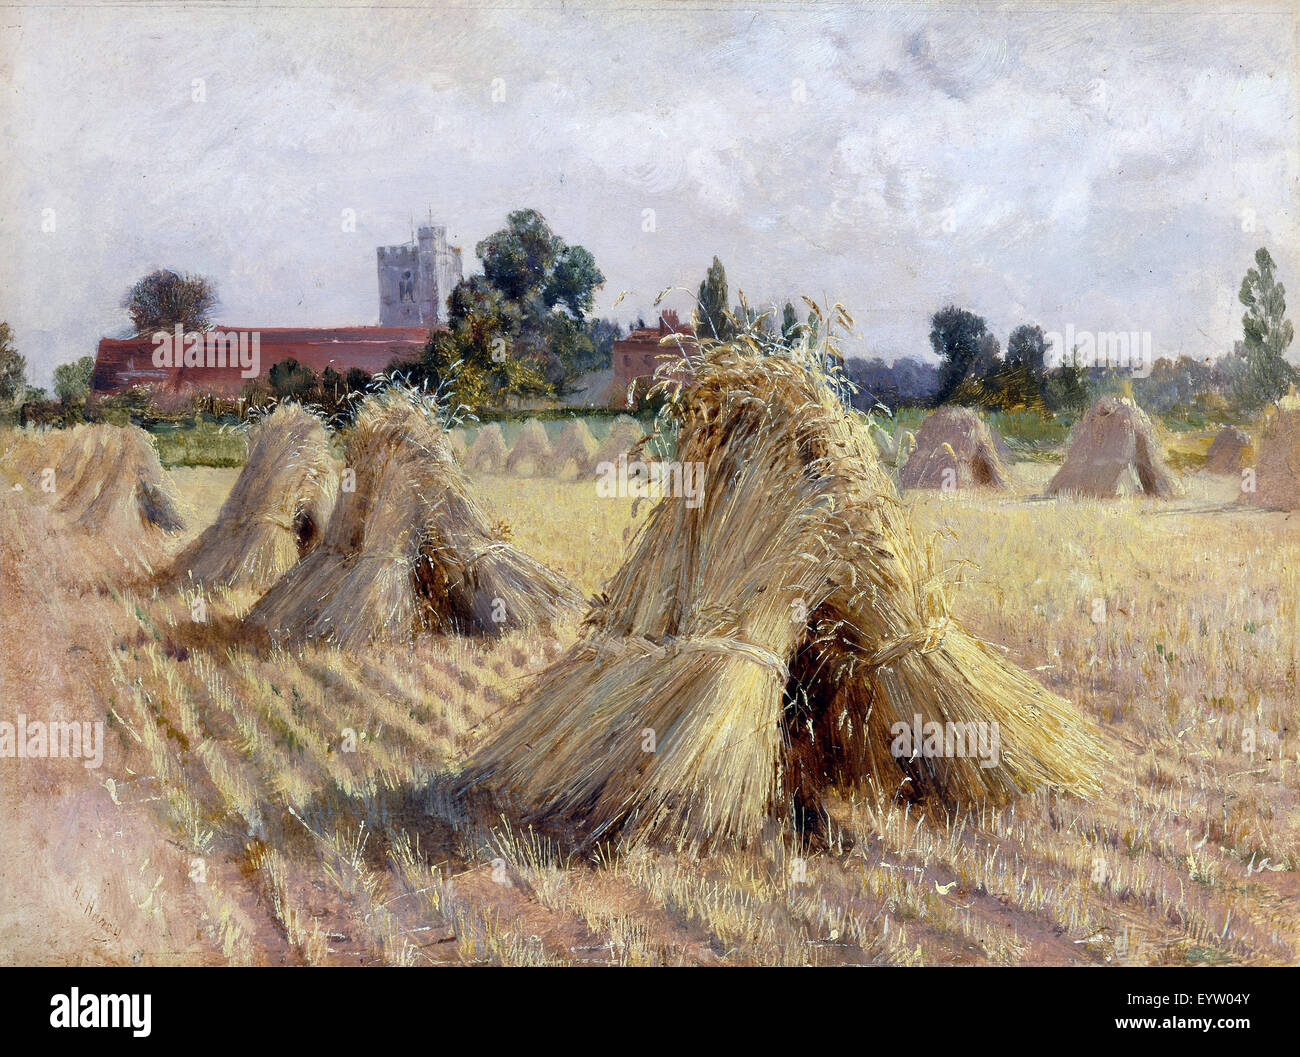 Heywood Hardy, Corn Stooks by Bray Church 1872 Oil on paper. Yale Center for British Art, New Haven, USA. Stock Photo